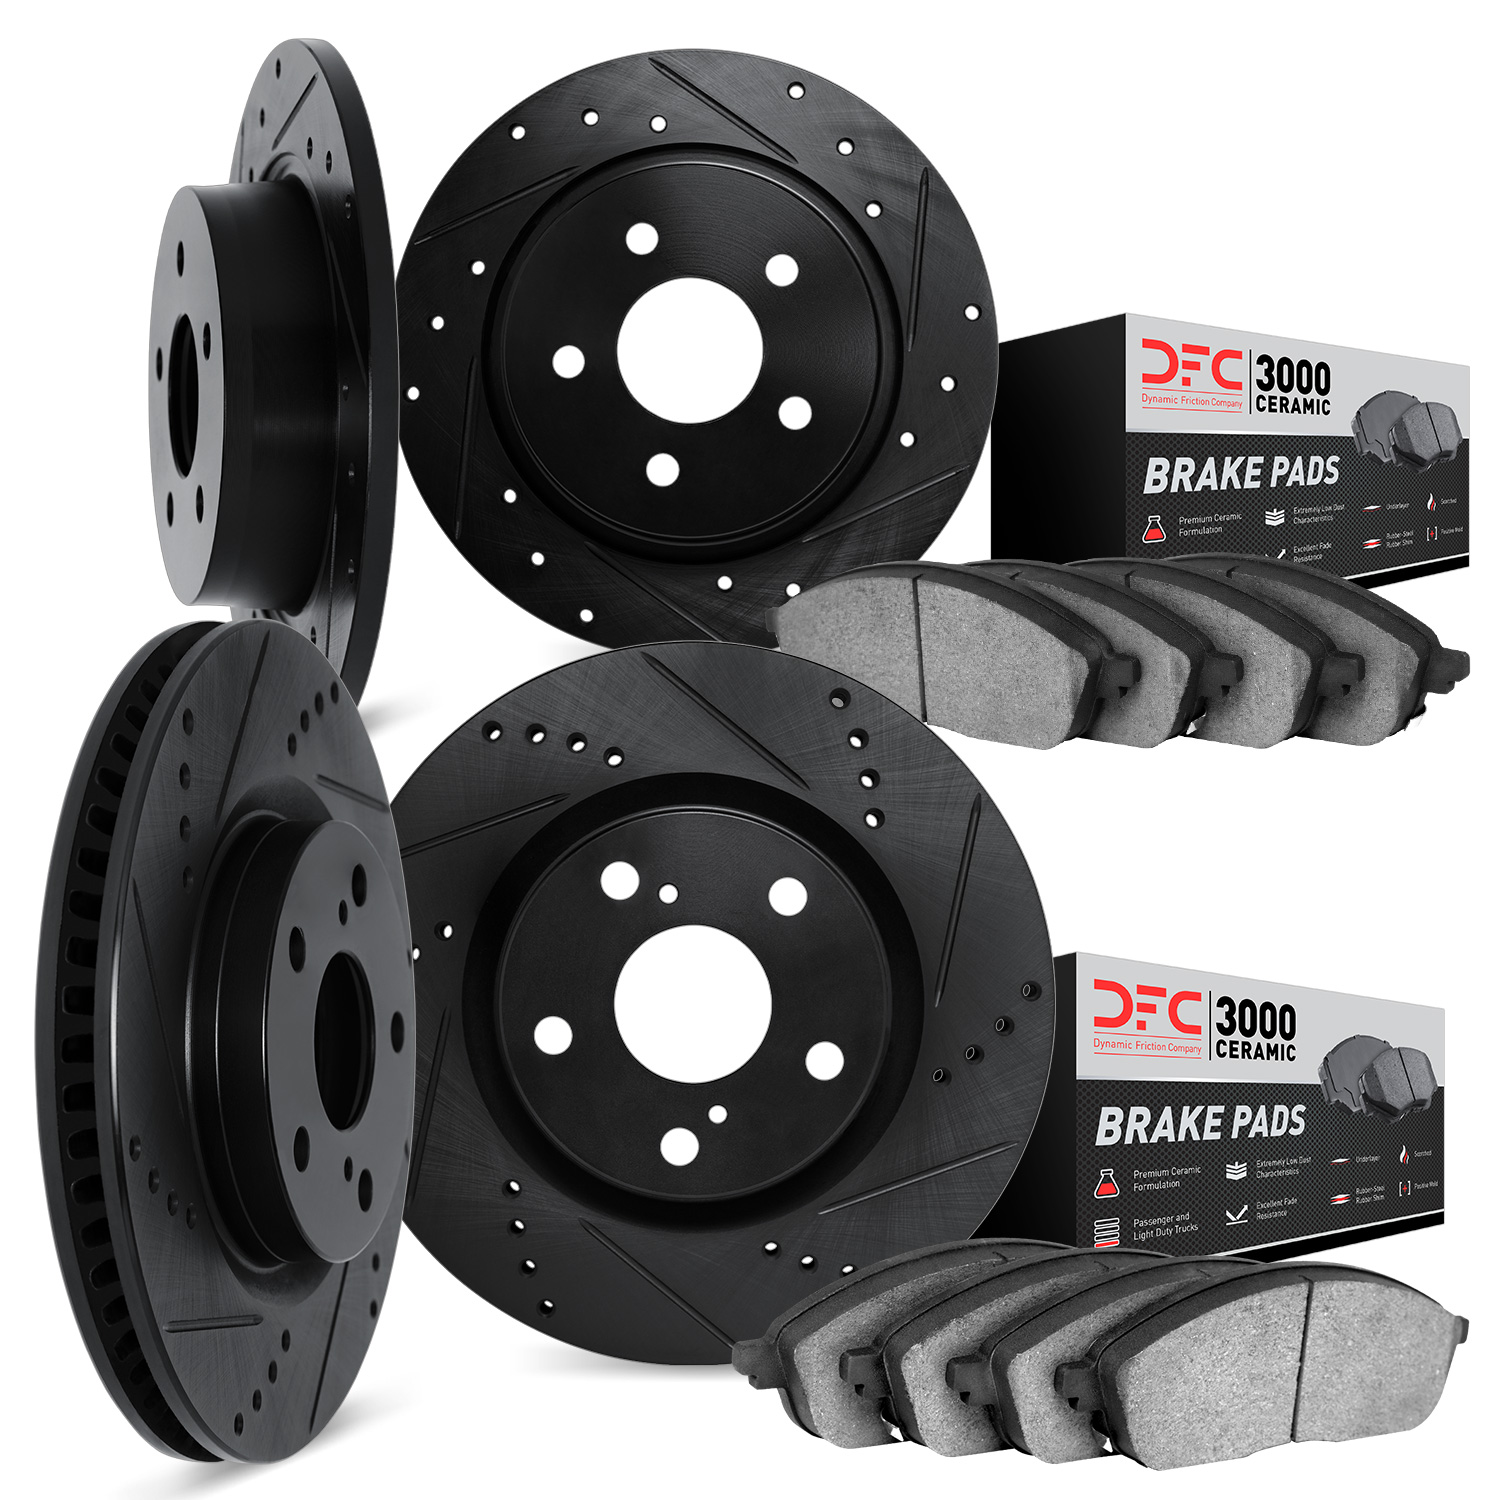 8304-59069 Drilled/Slotted Brake Rotors with 3000-Series Ceramic Brake Pads Kit [Black], 2012-2012 Acura/Honda, Position: Front